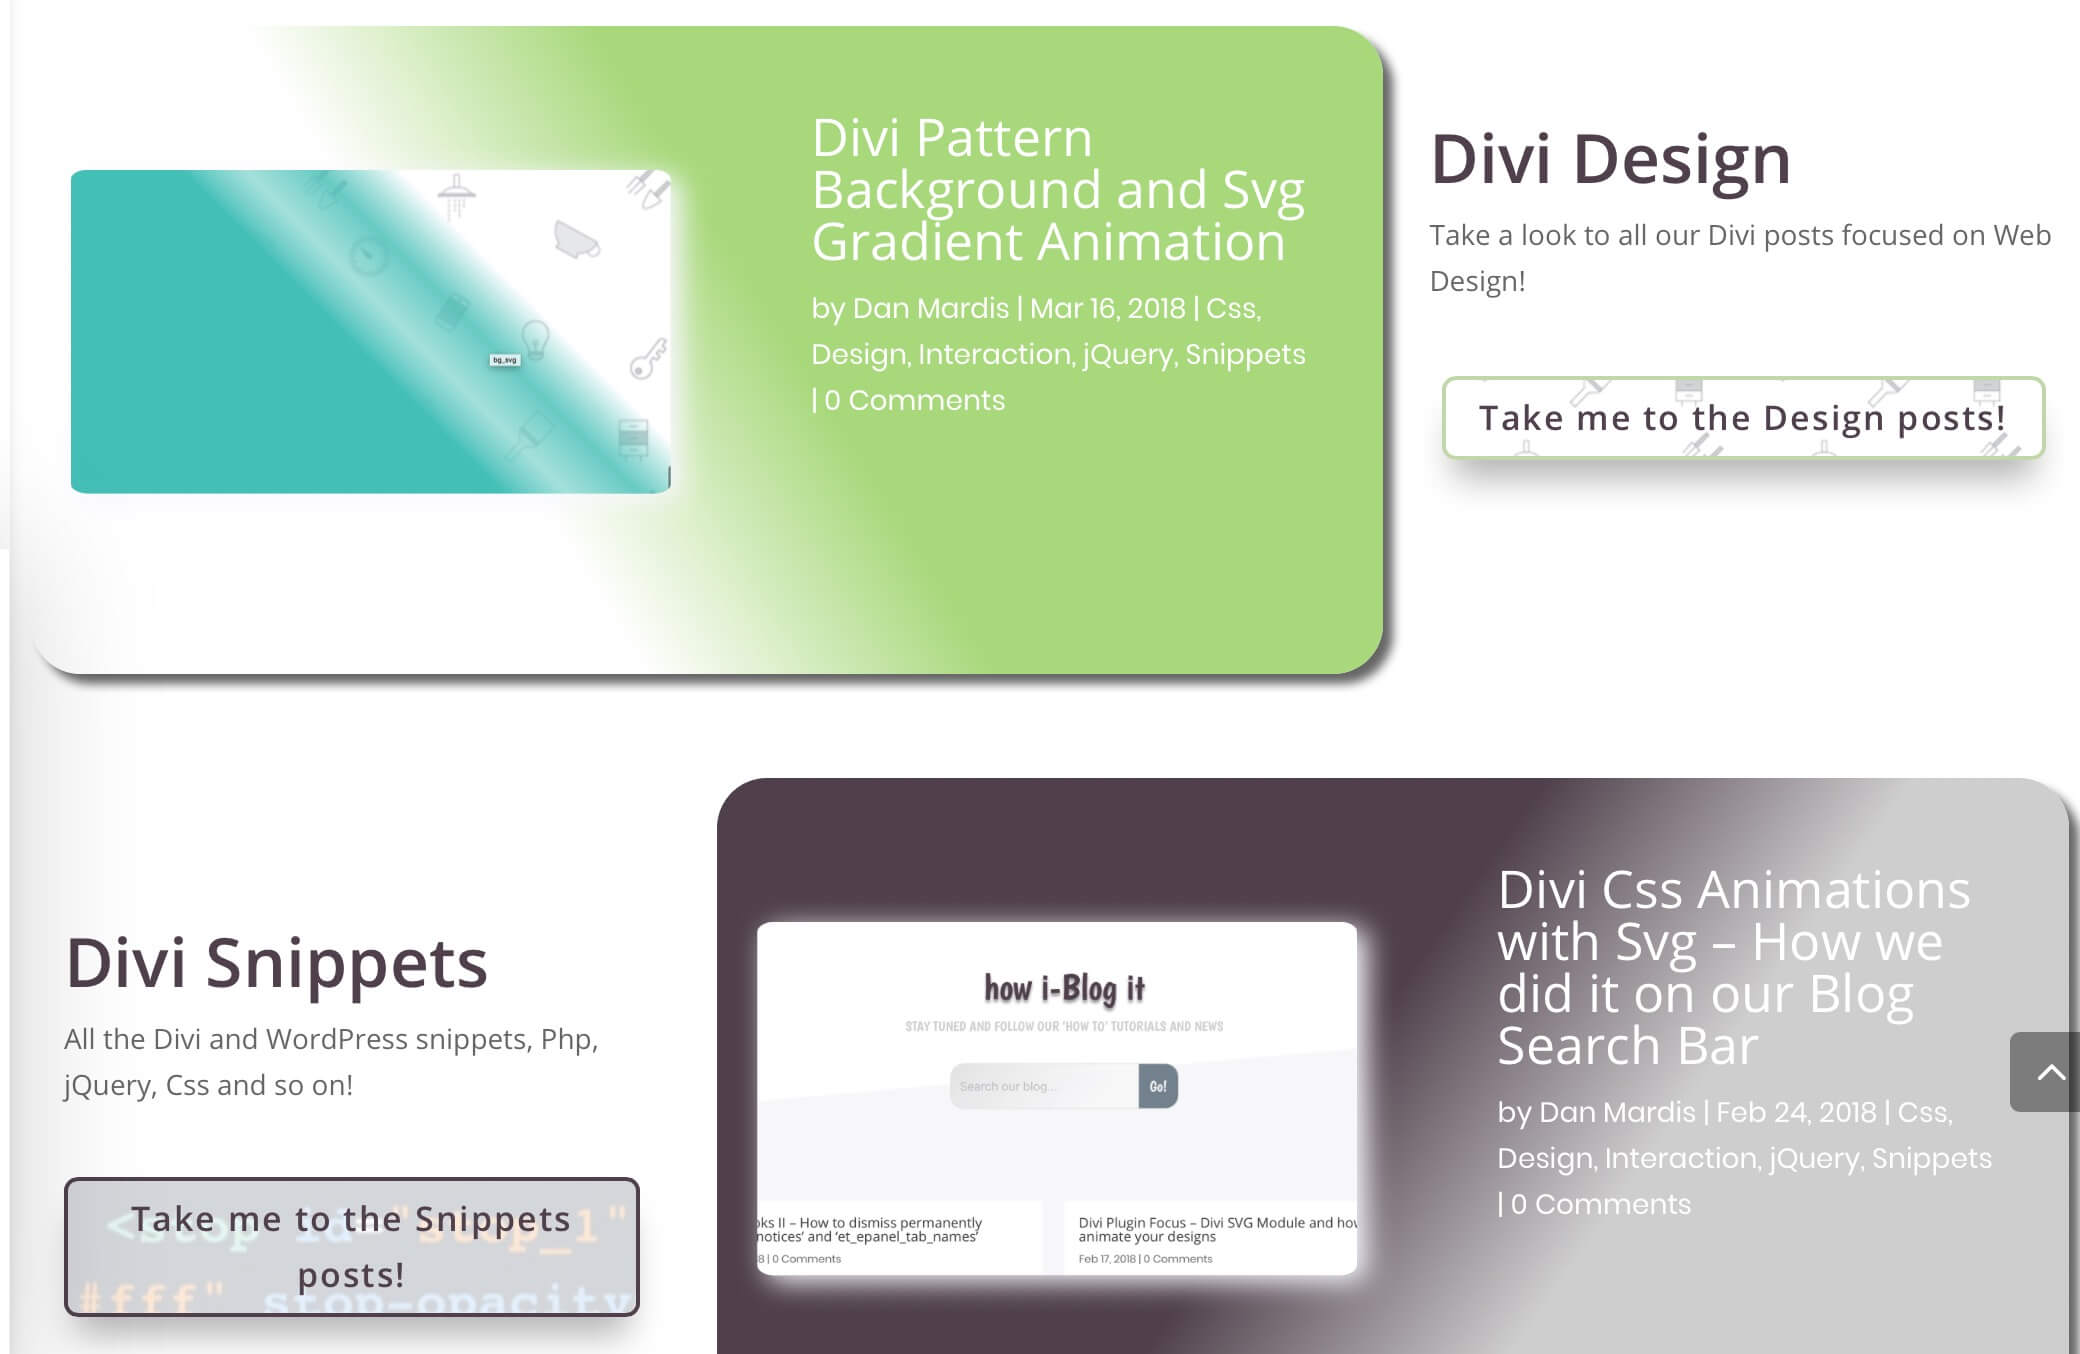 Divi Blog Cards – How we restyle our Home blog section